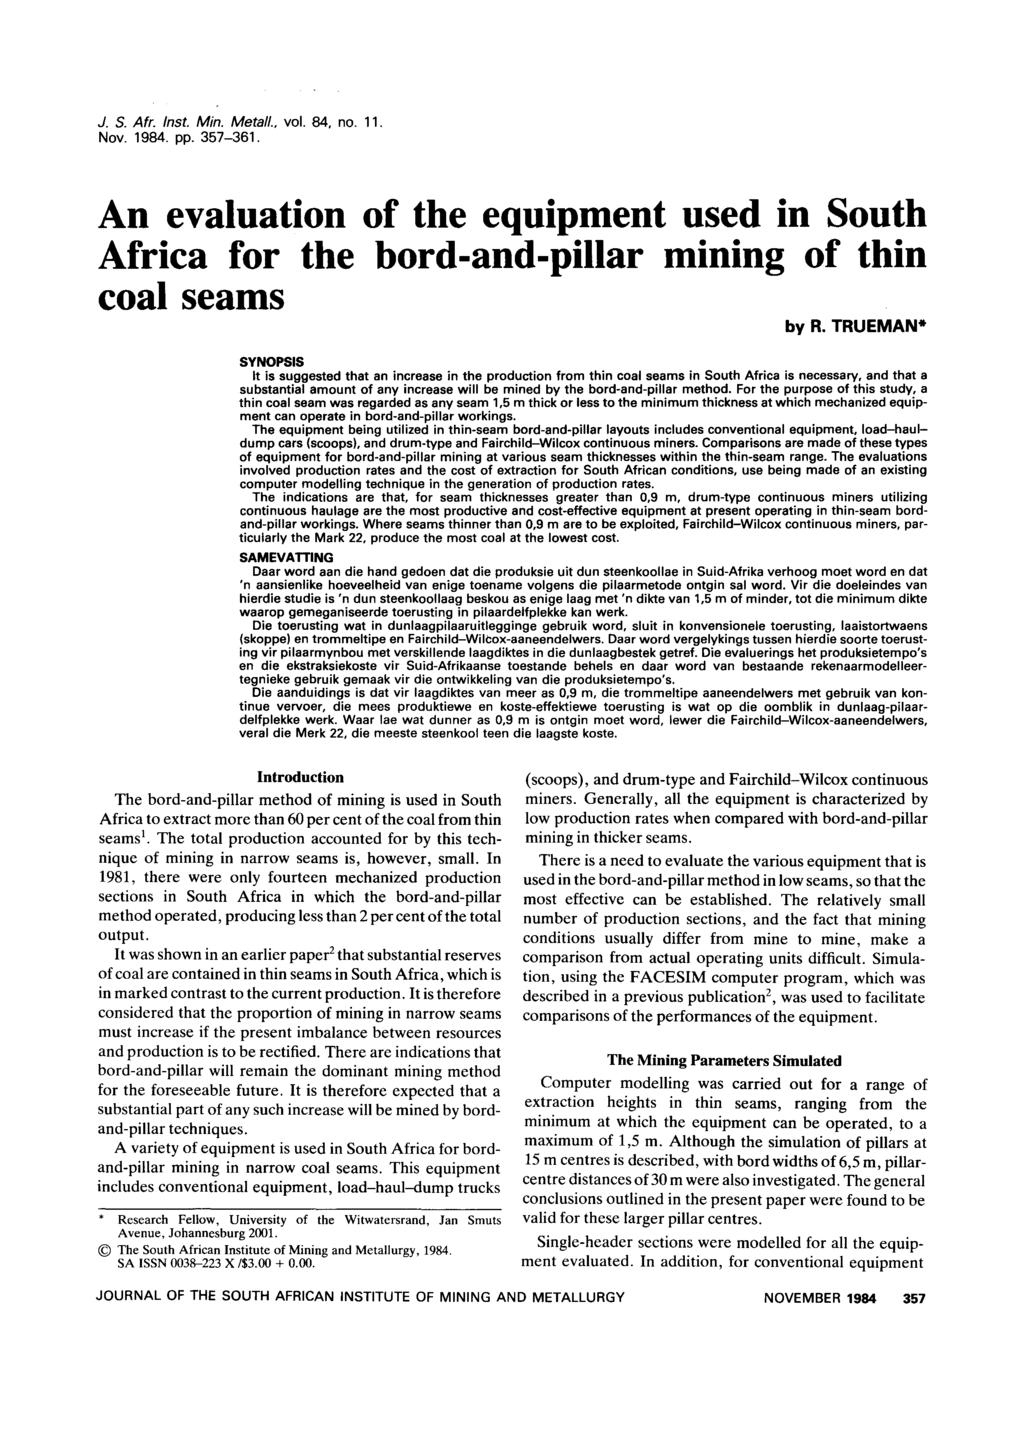 J. S. Atr. Inst. Min. Metal/.. vol. 84. no. 11. Nov. 1984. pp. 357-361. An evaluation of the equipment used in South Africa for the bord-and-pillar mining of thin coal seams by R.